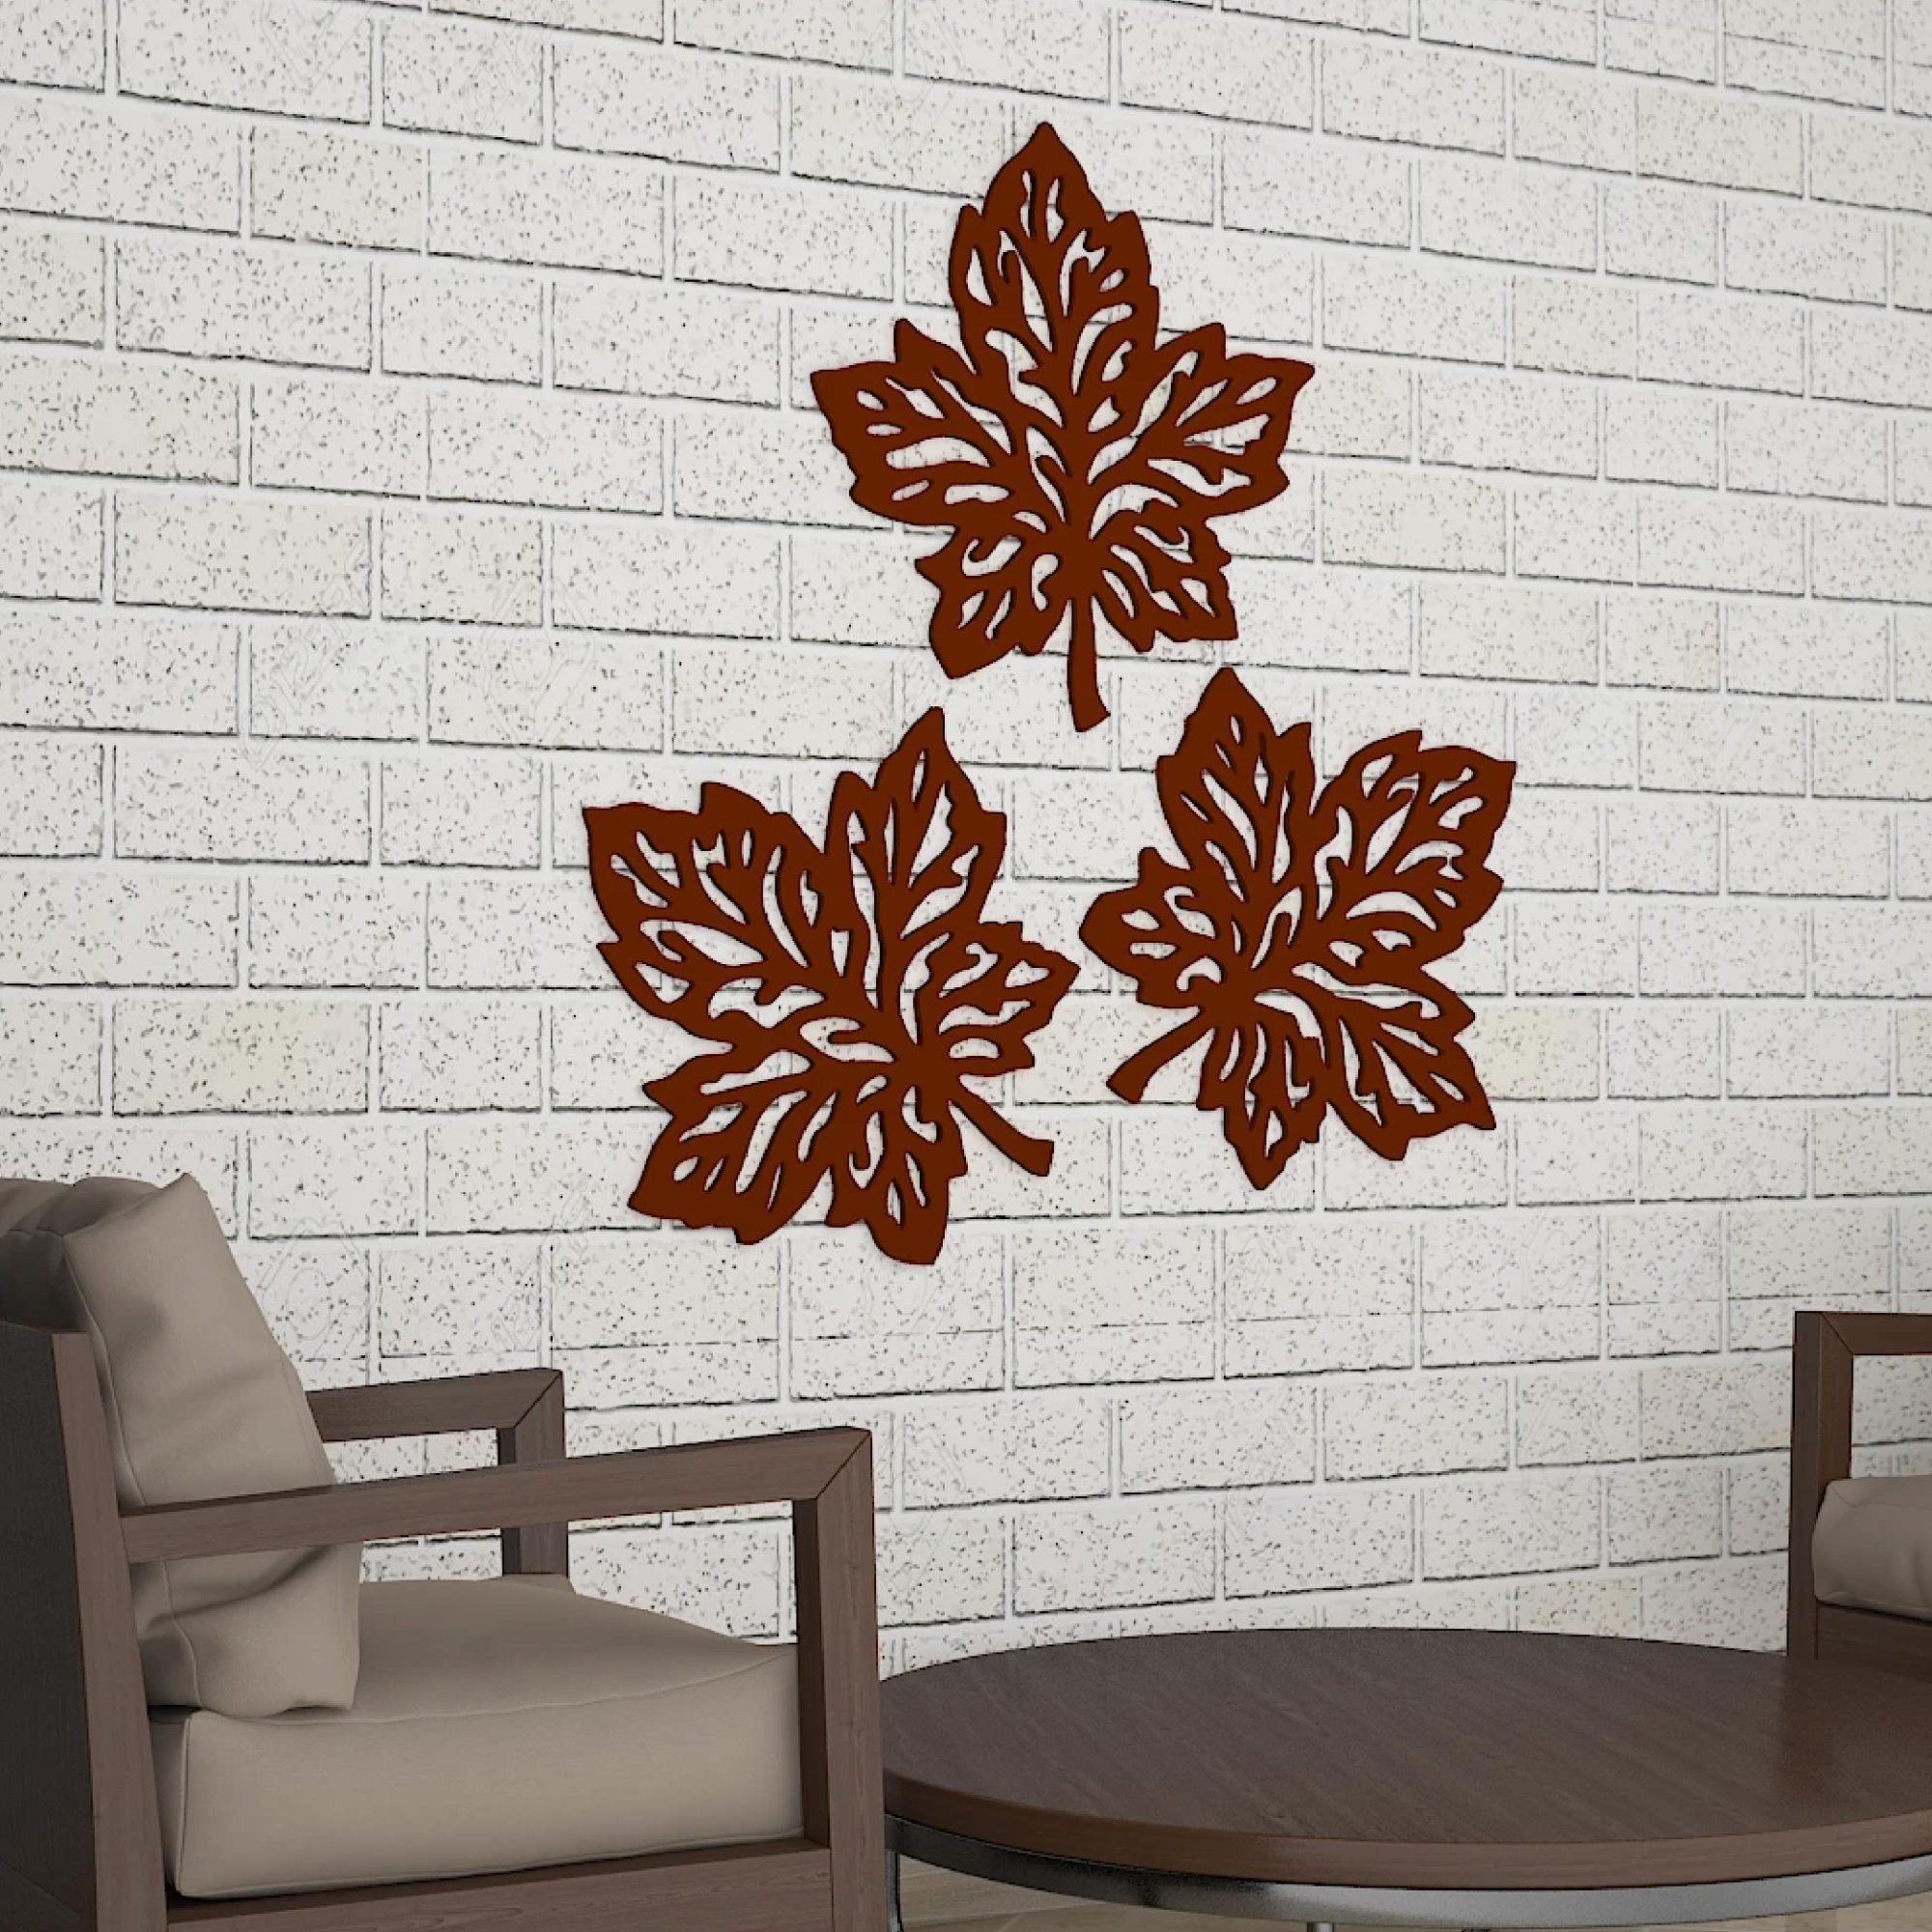 Beautiful Leaves in Brown Color Design Wooden Wall Hanging